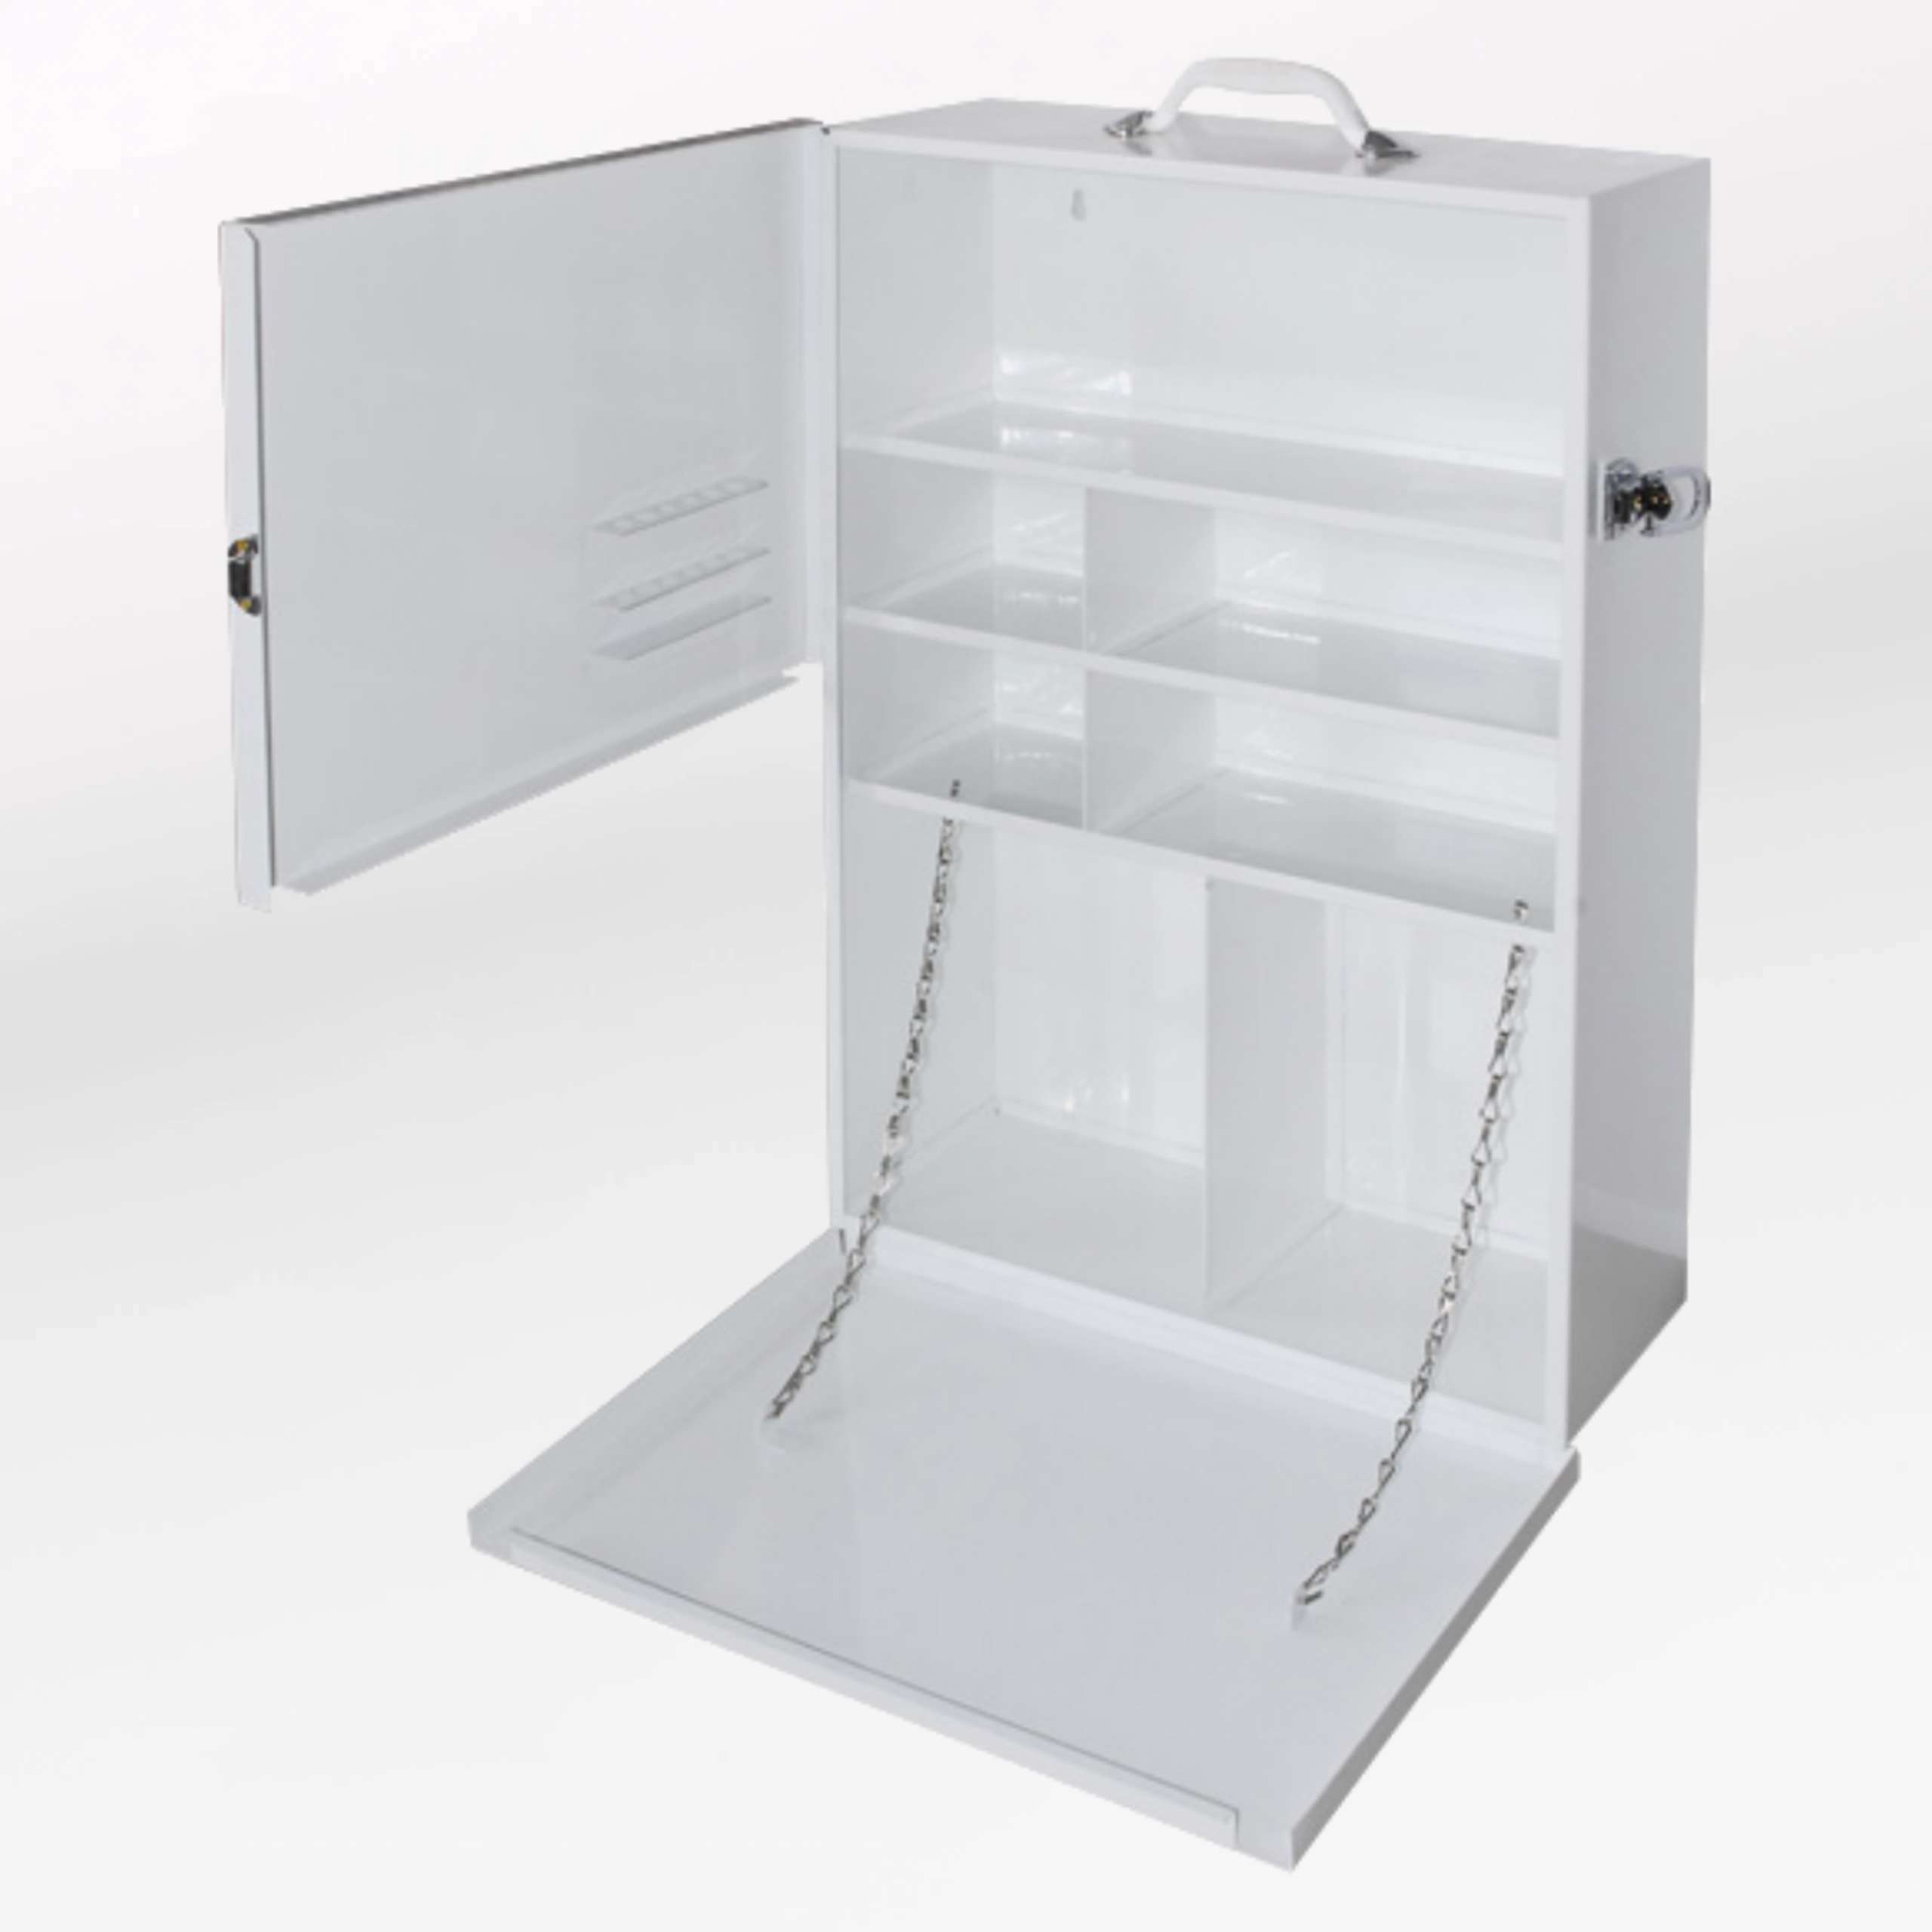 Left and Bottom door first aid cabinets